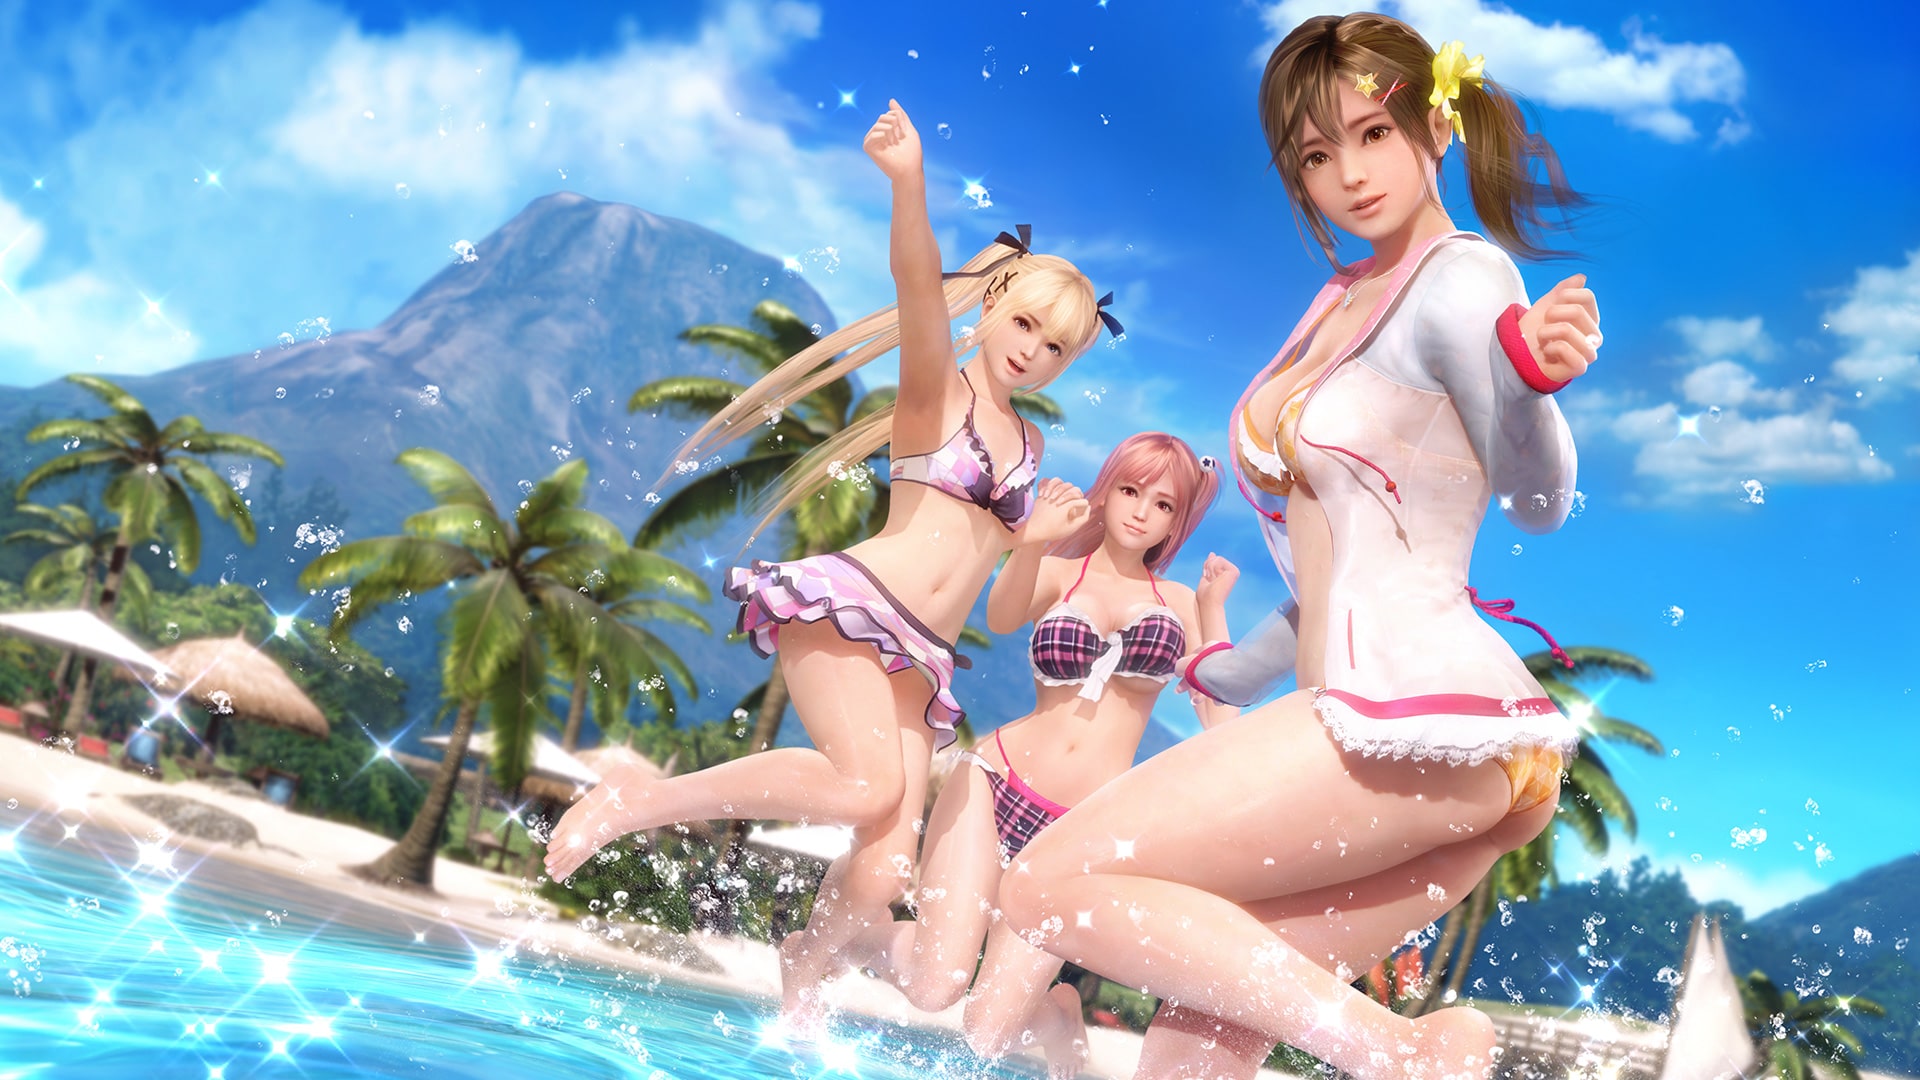 『DEAD OR ALIVE Xtreme 3 Scarlet』 ＆『VR Passport』 (English/Chinese/Korean Ver.)